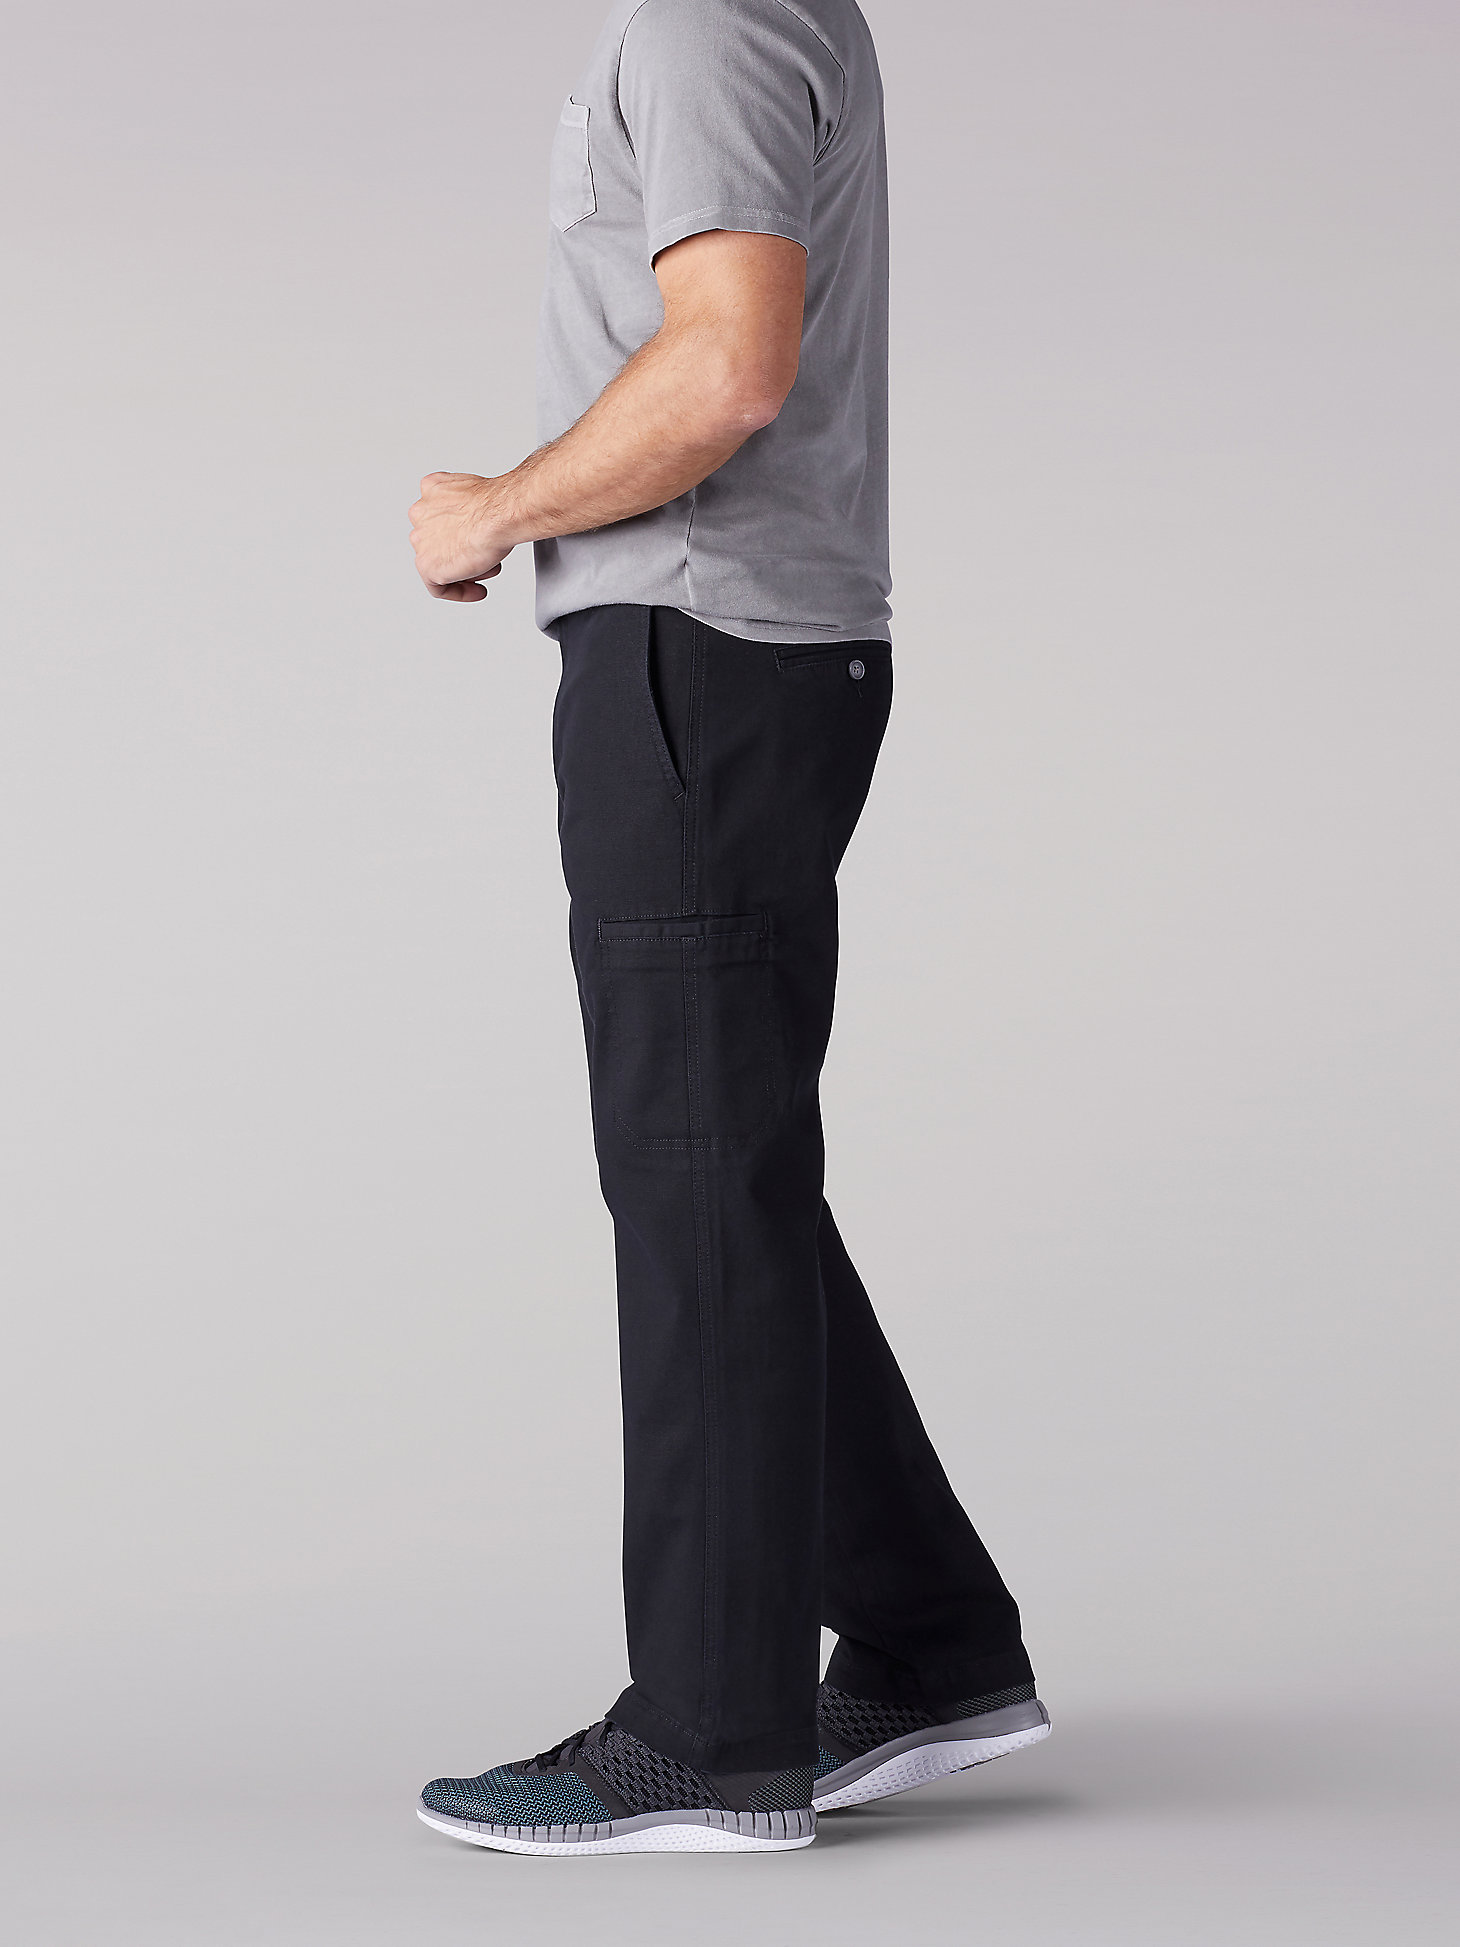 Men's Extreme Motion Straight Fit Cargo Pant (Big & Tall) in Black alternative view 2